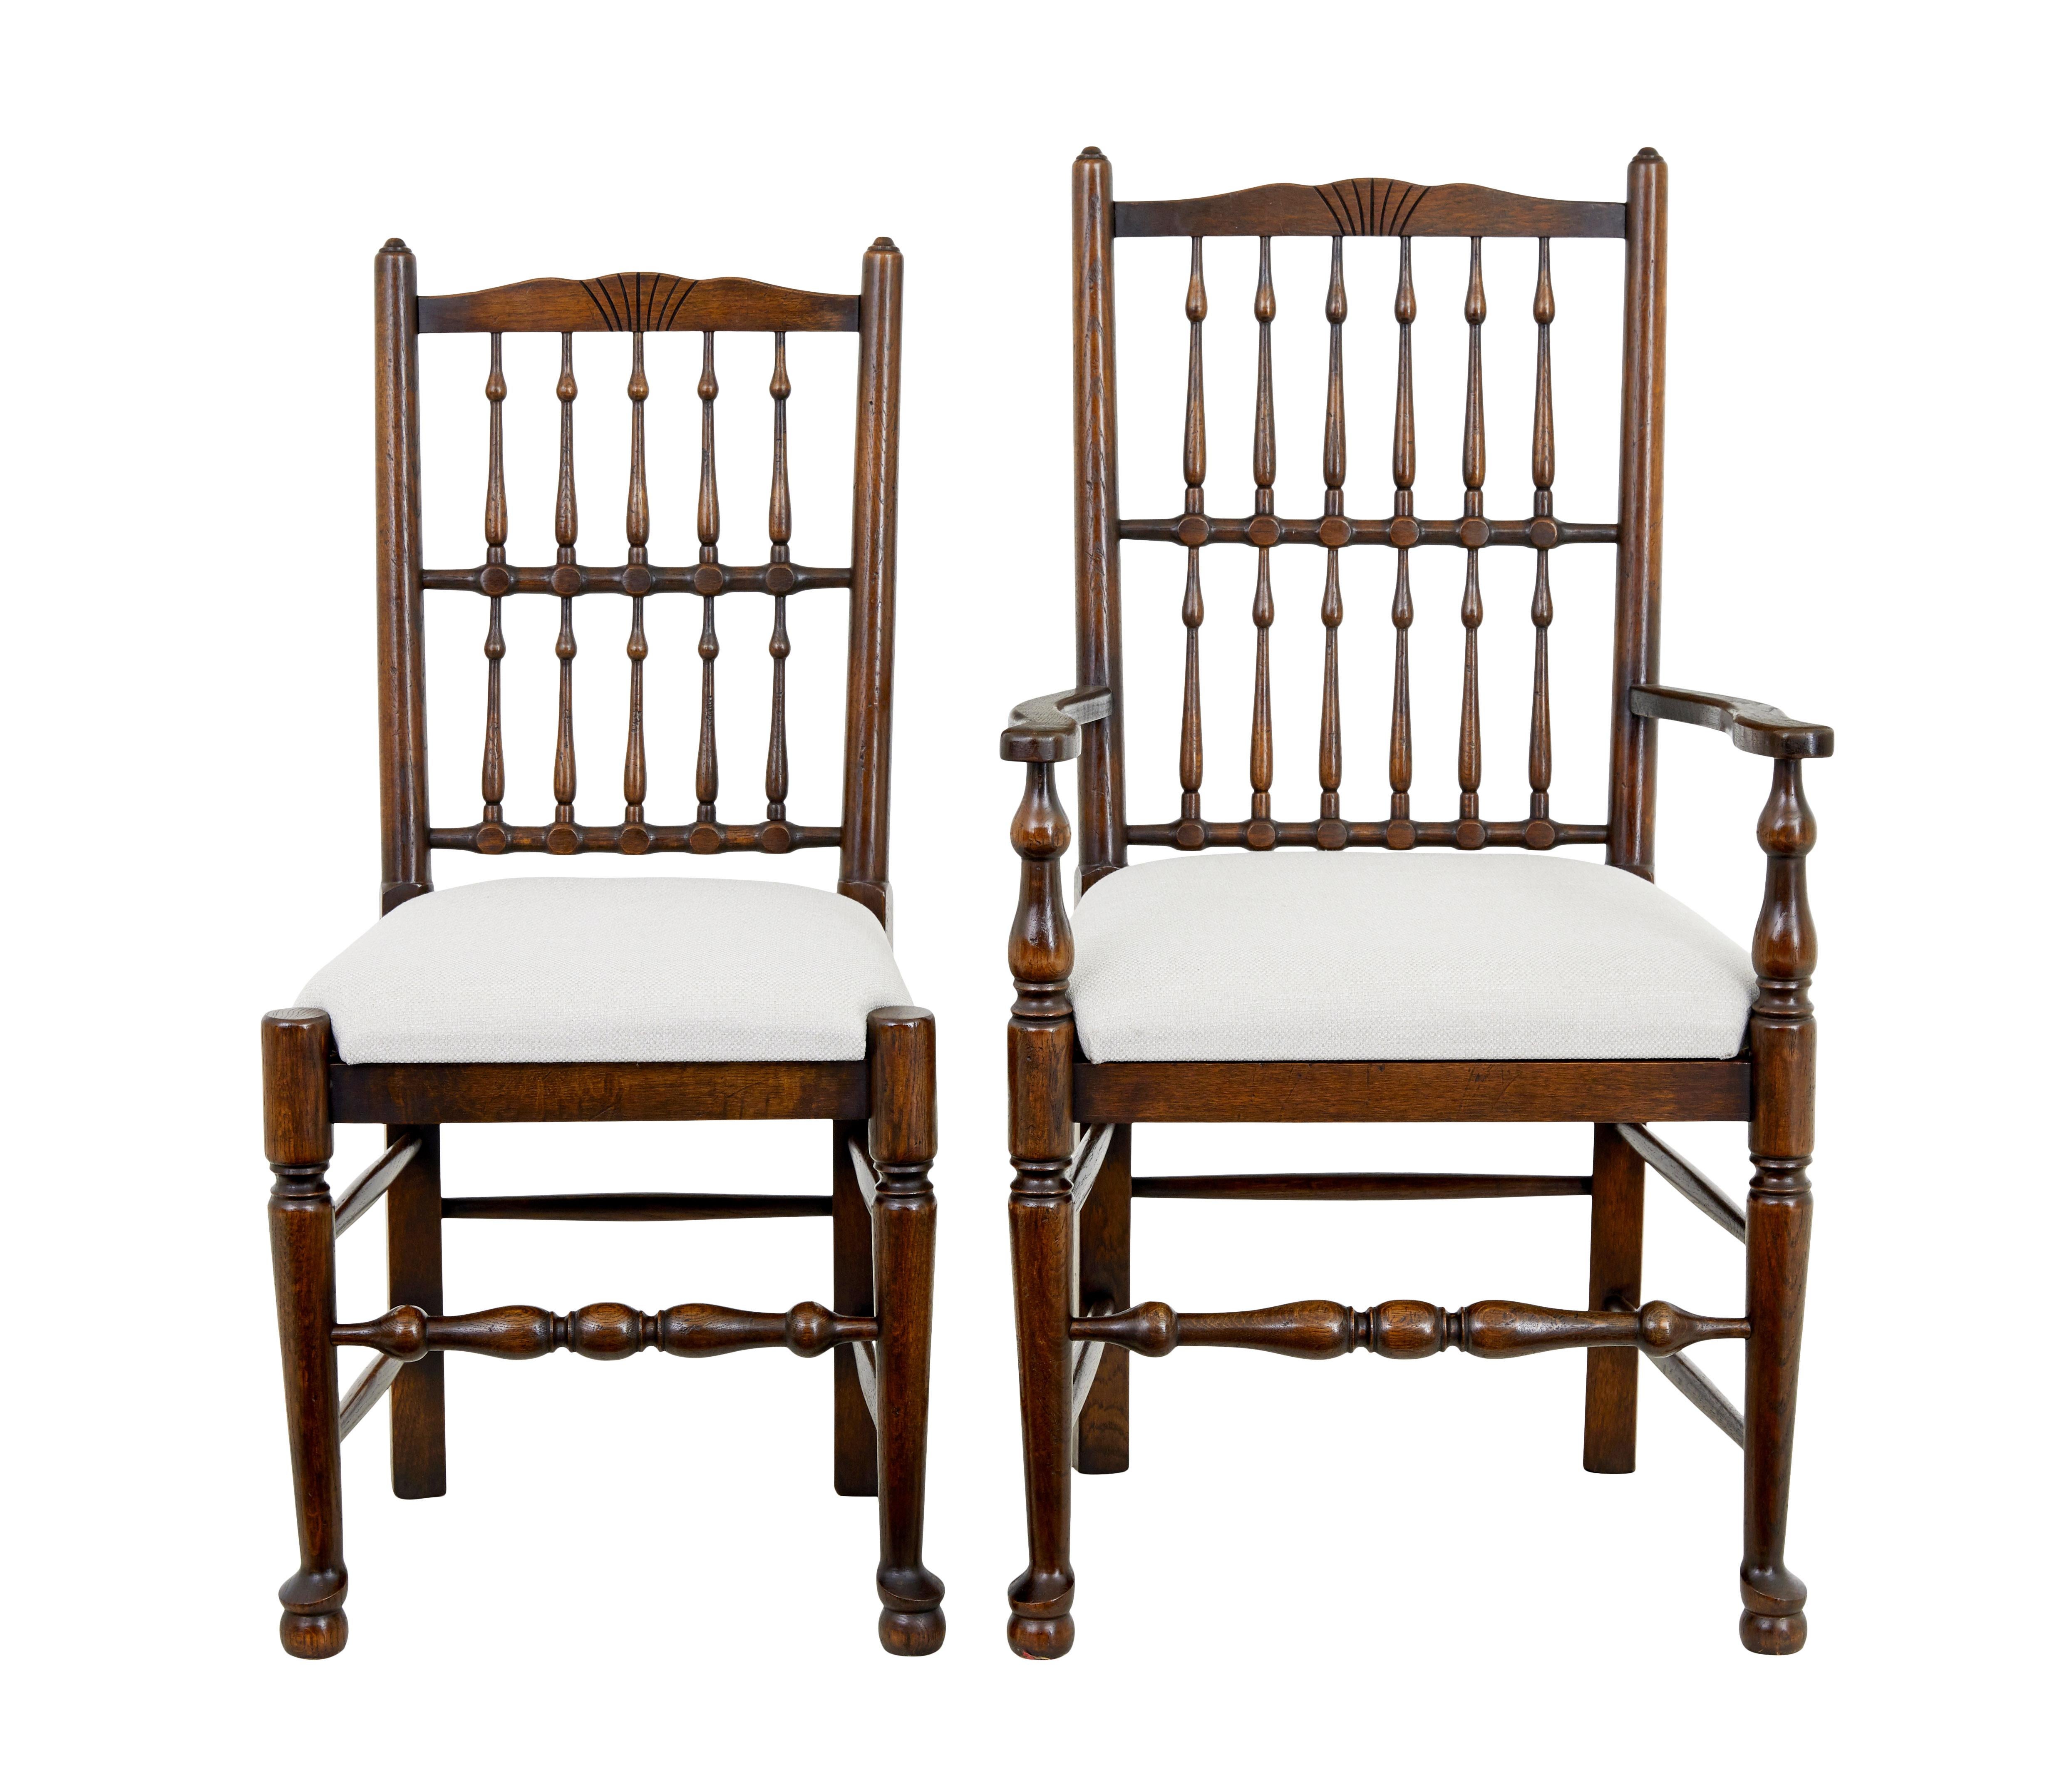 Set of 6+2 oak spindle back dining chairs circa 1990.

Good quality set of English made oak dining chairs.  Set comprises of 2 carver's and 6 single chairs.  Shaped back's with turned back rest detailing.  Standing on a front turned leg with pad